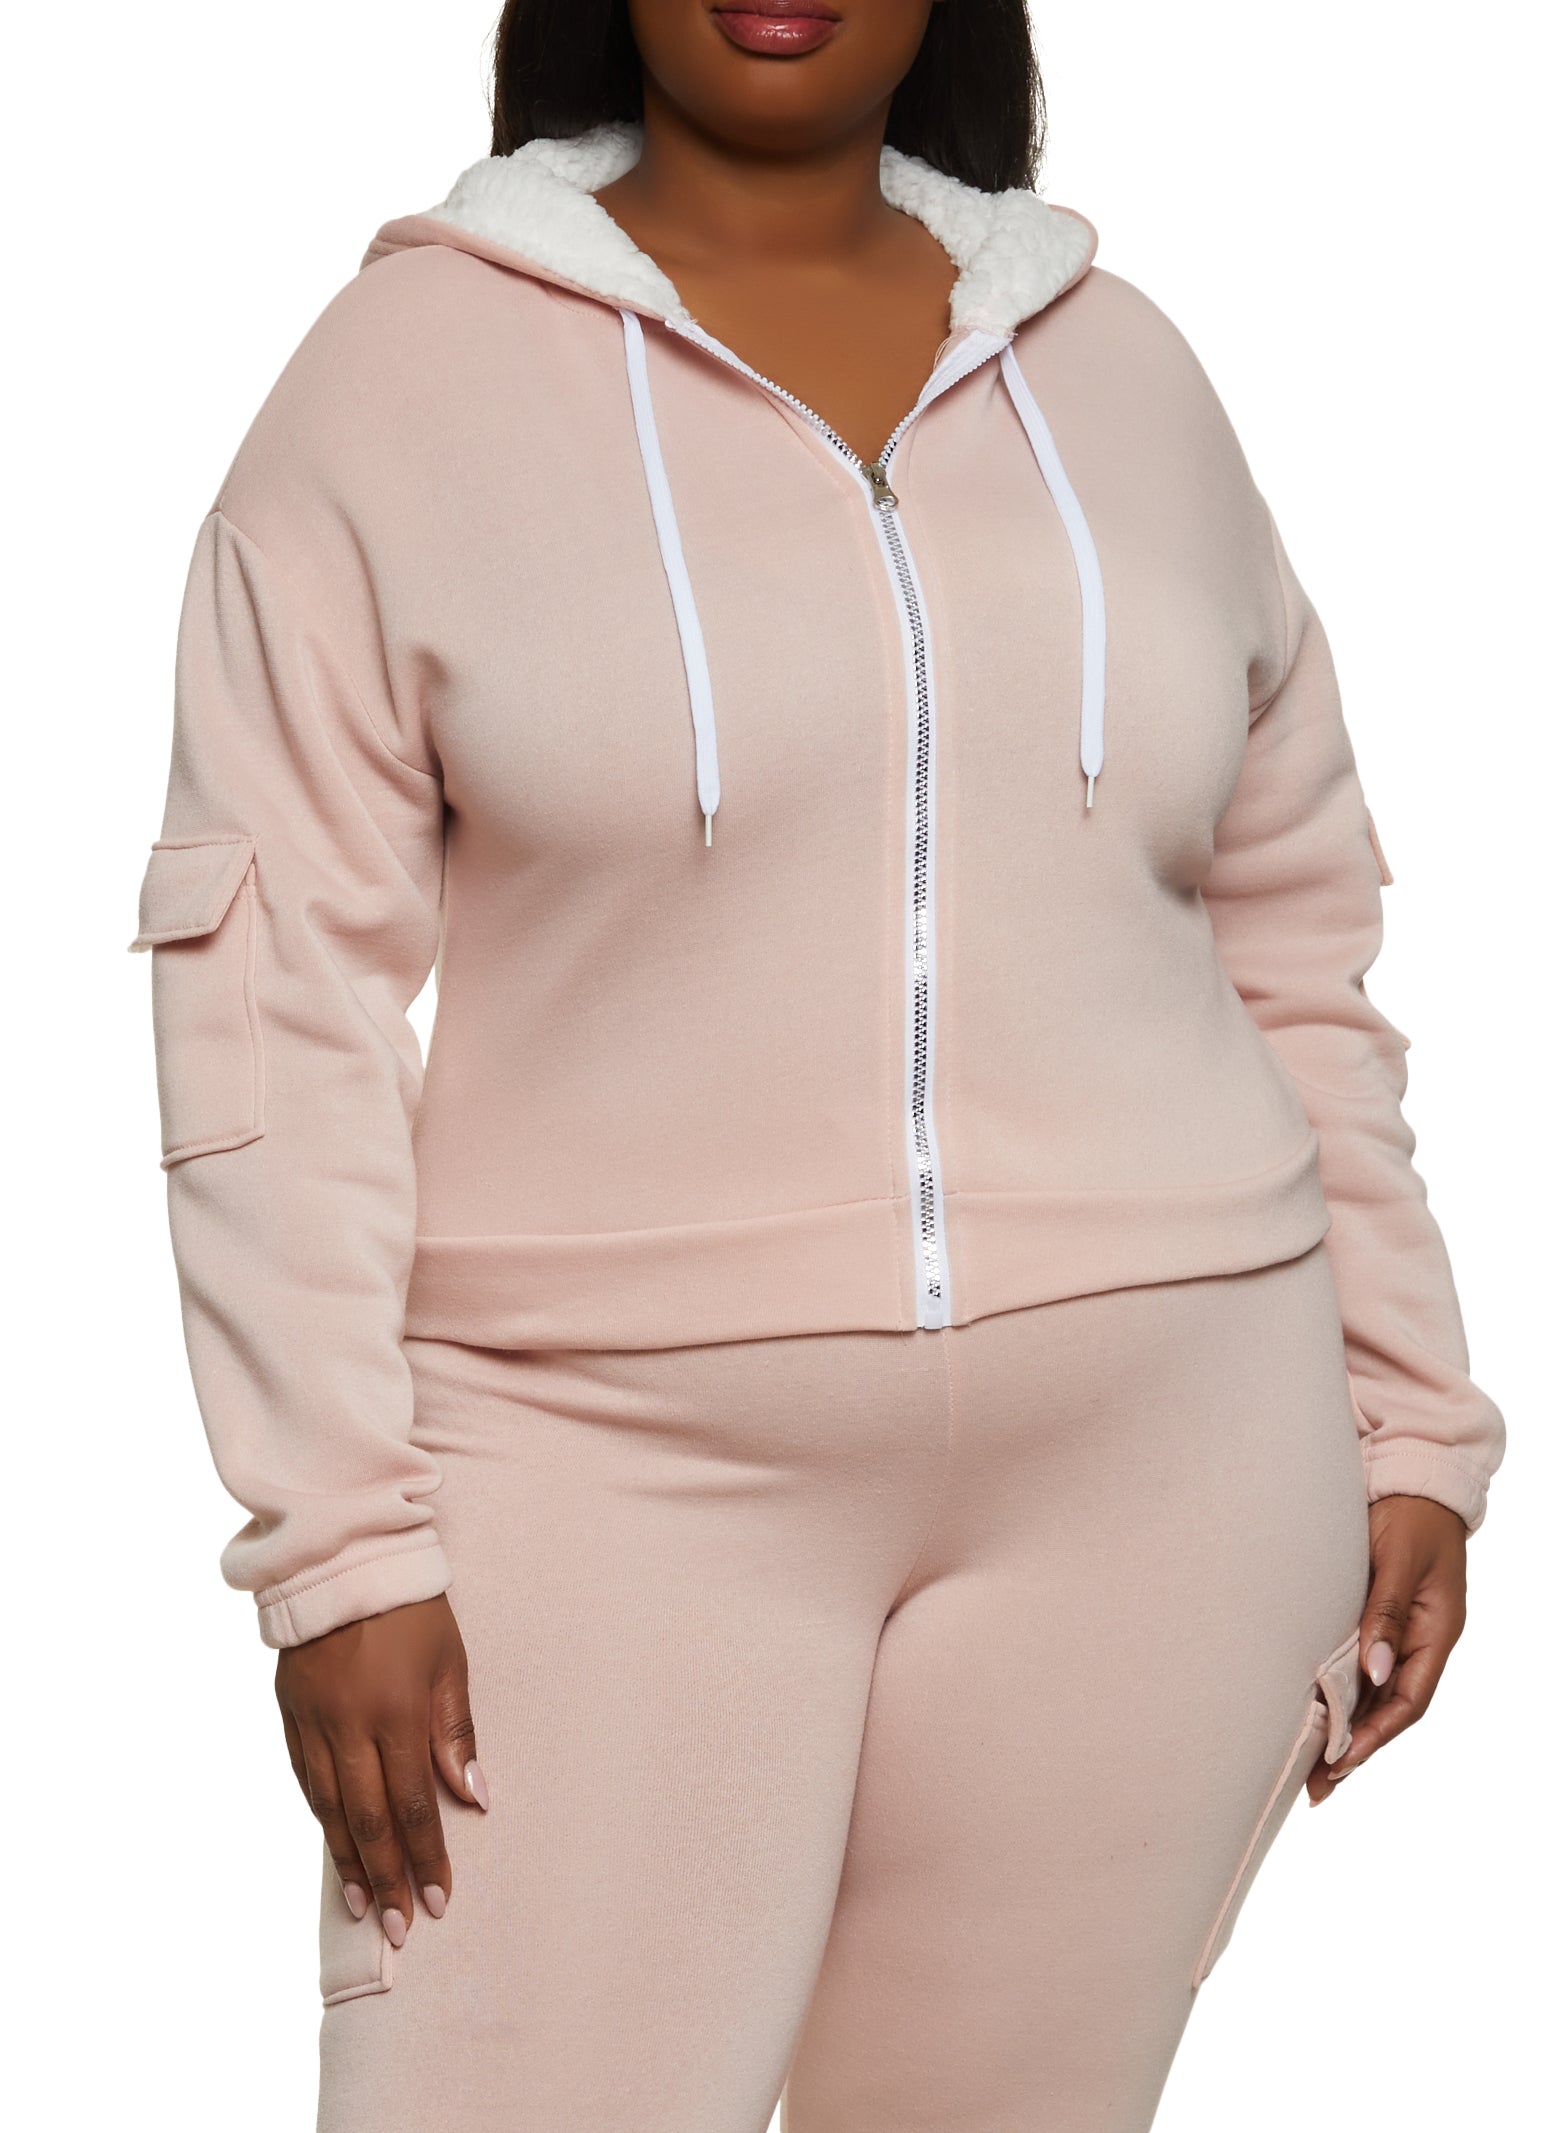 Final Sale Plus Size 2pc Hooded Zip-Up Jacket and Legging Set in Neon